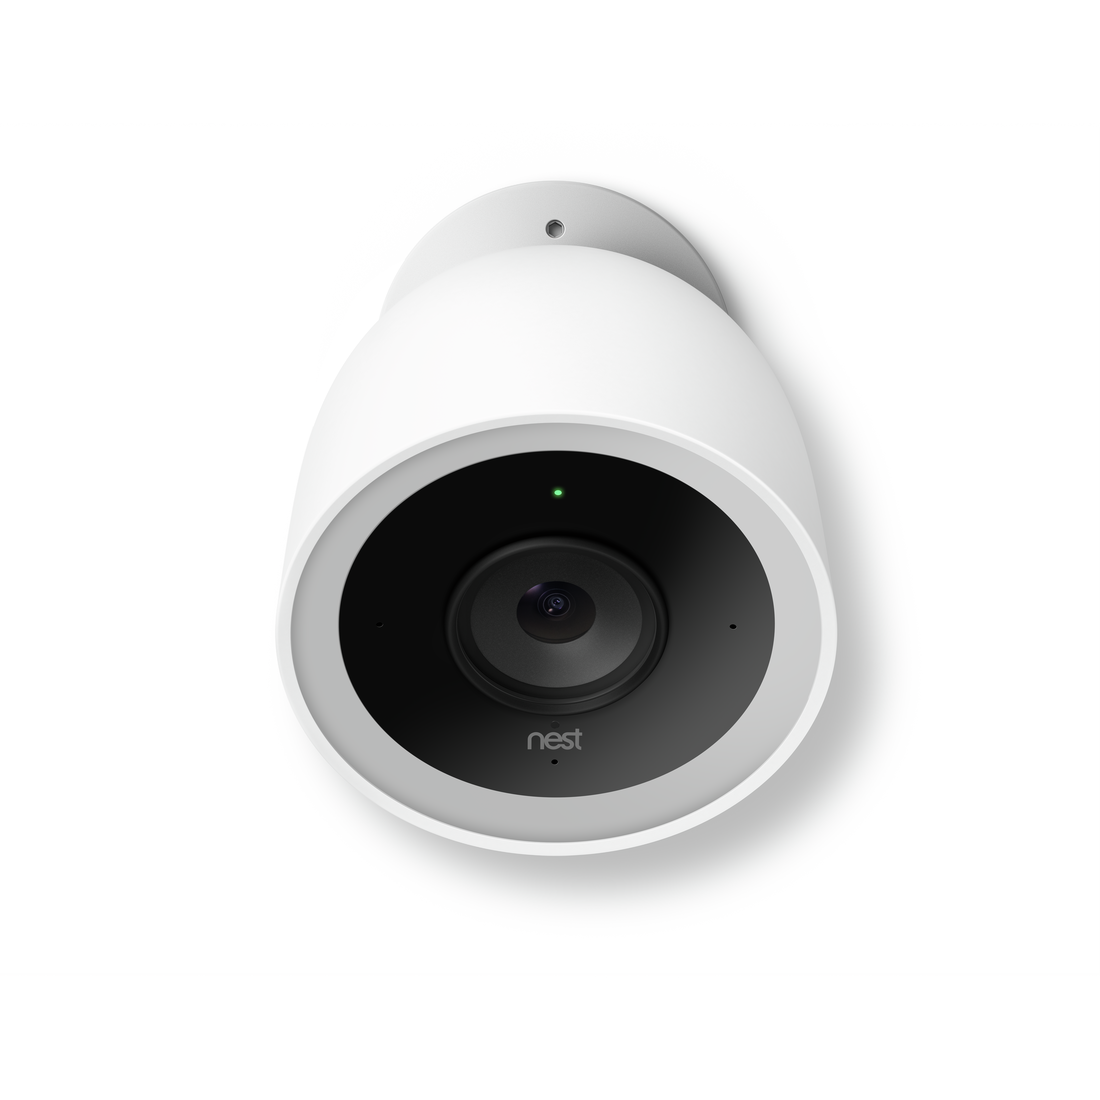 Google Nest Cam IQ outdoor. Your first line of defense.